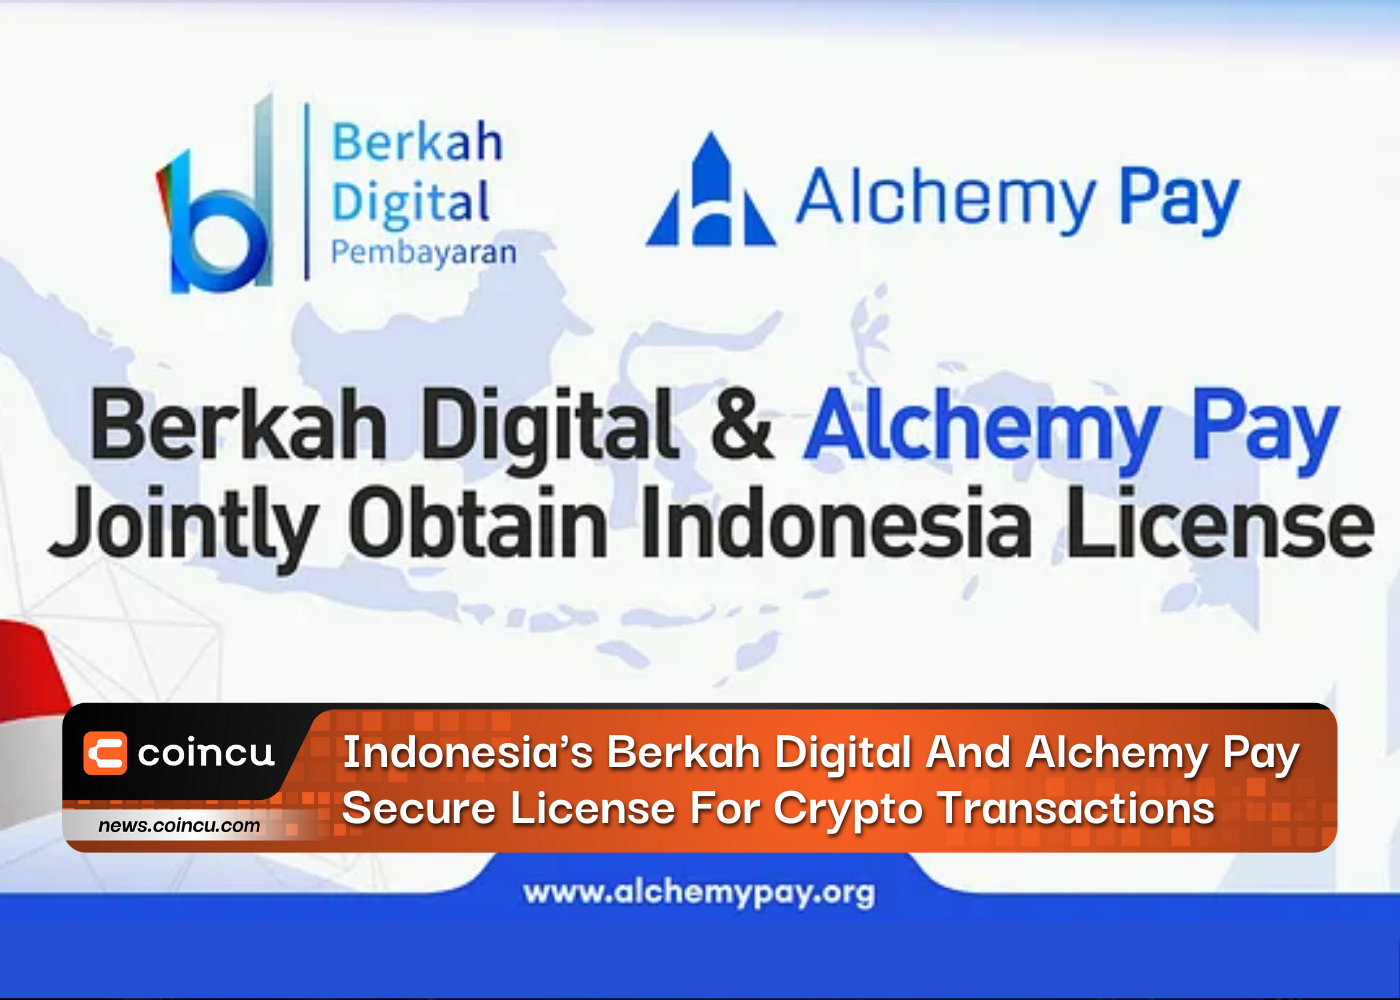 Indonesia's Berkah Digital And Alchemy Pay Secure License For Crypto Transactions